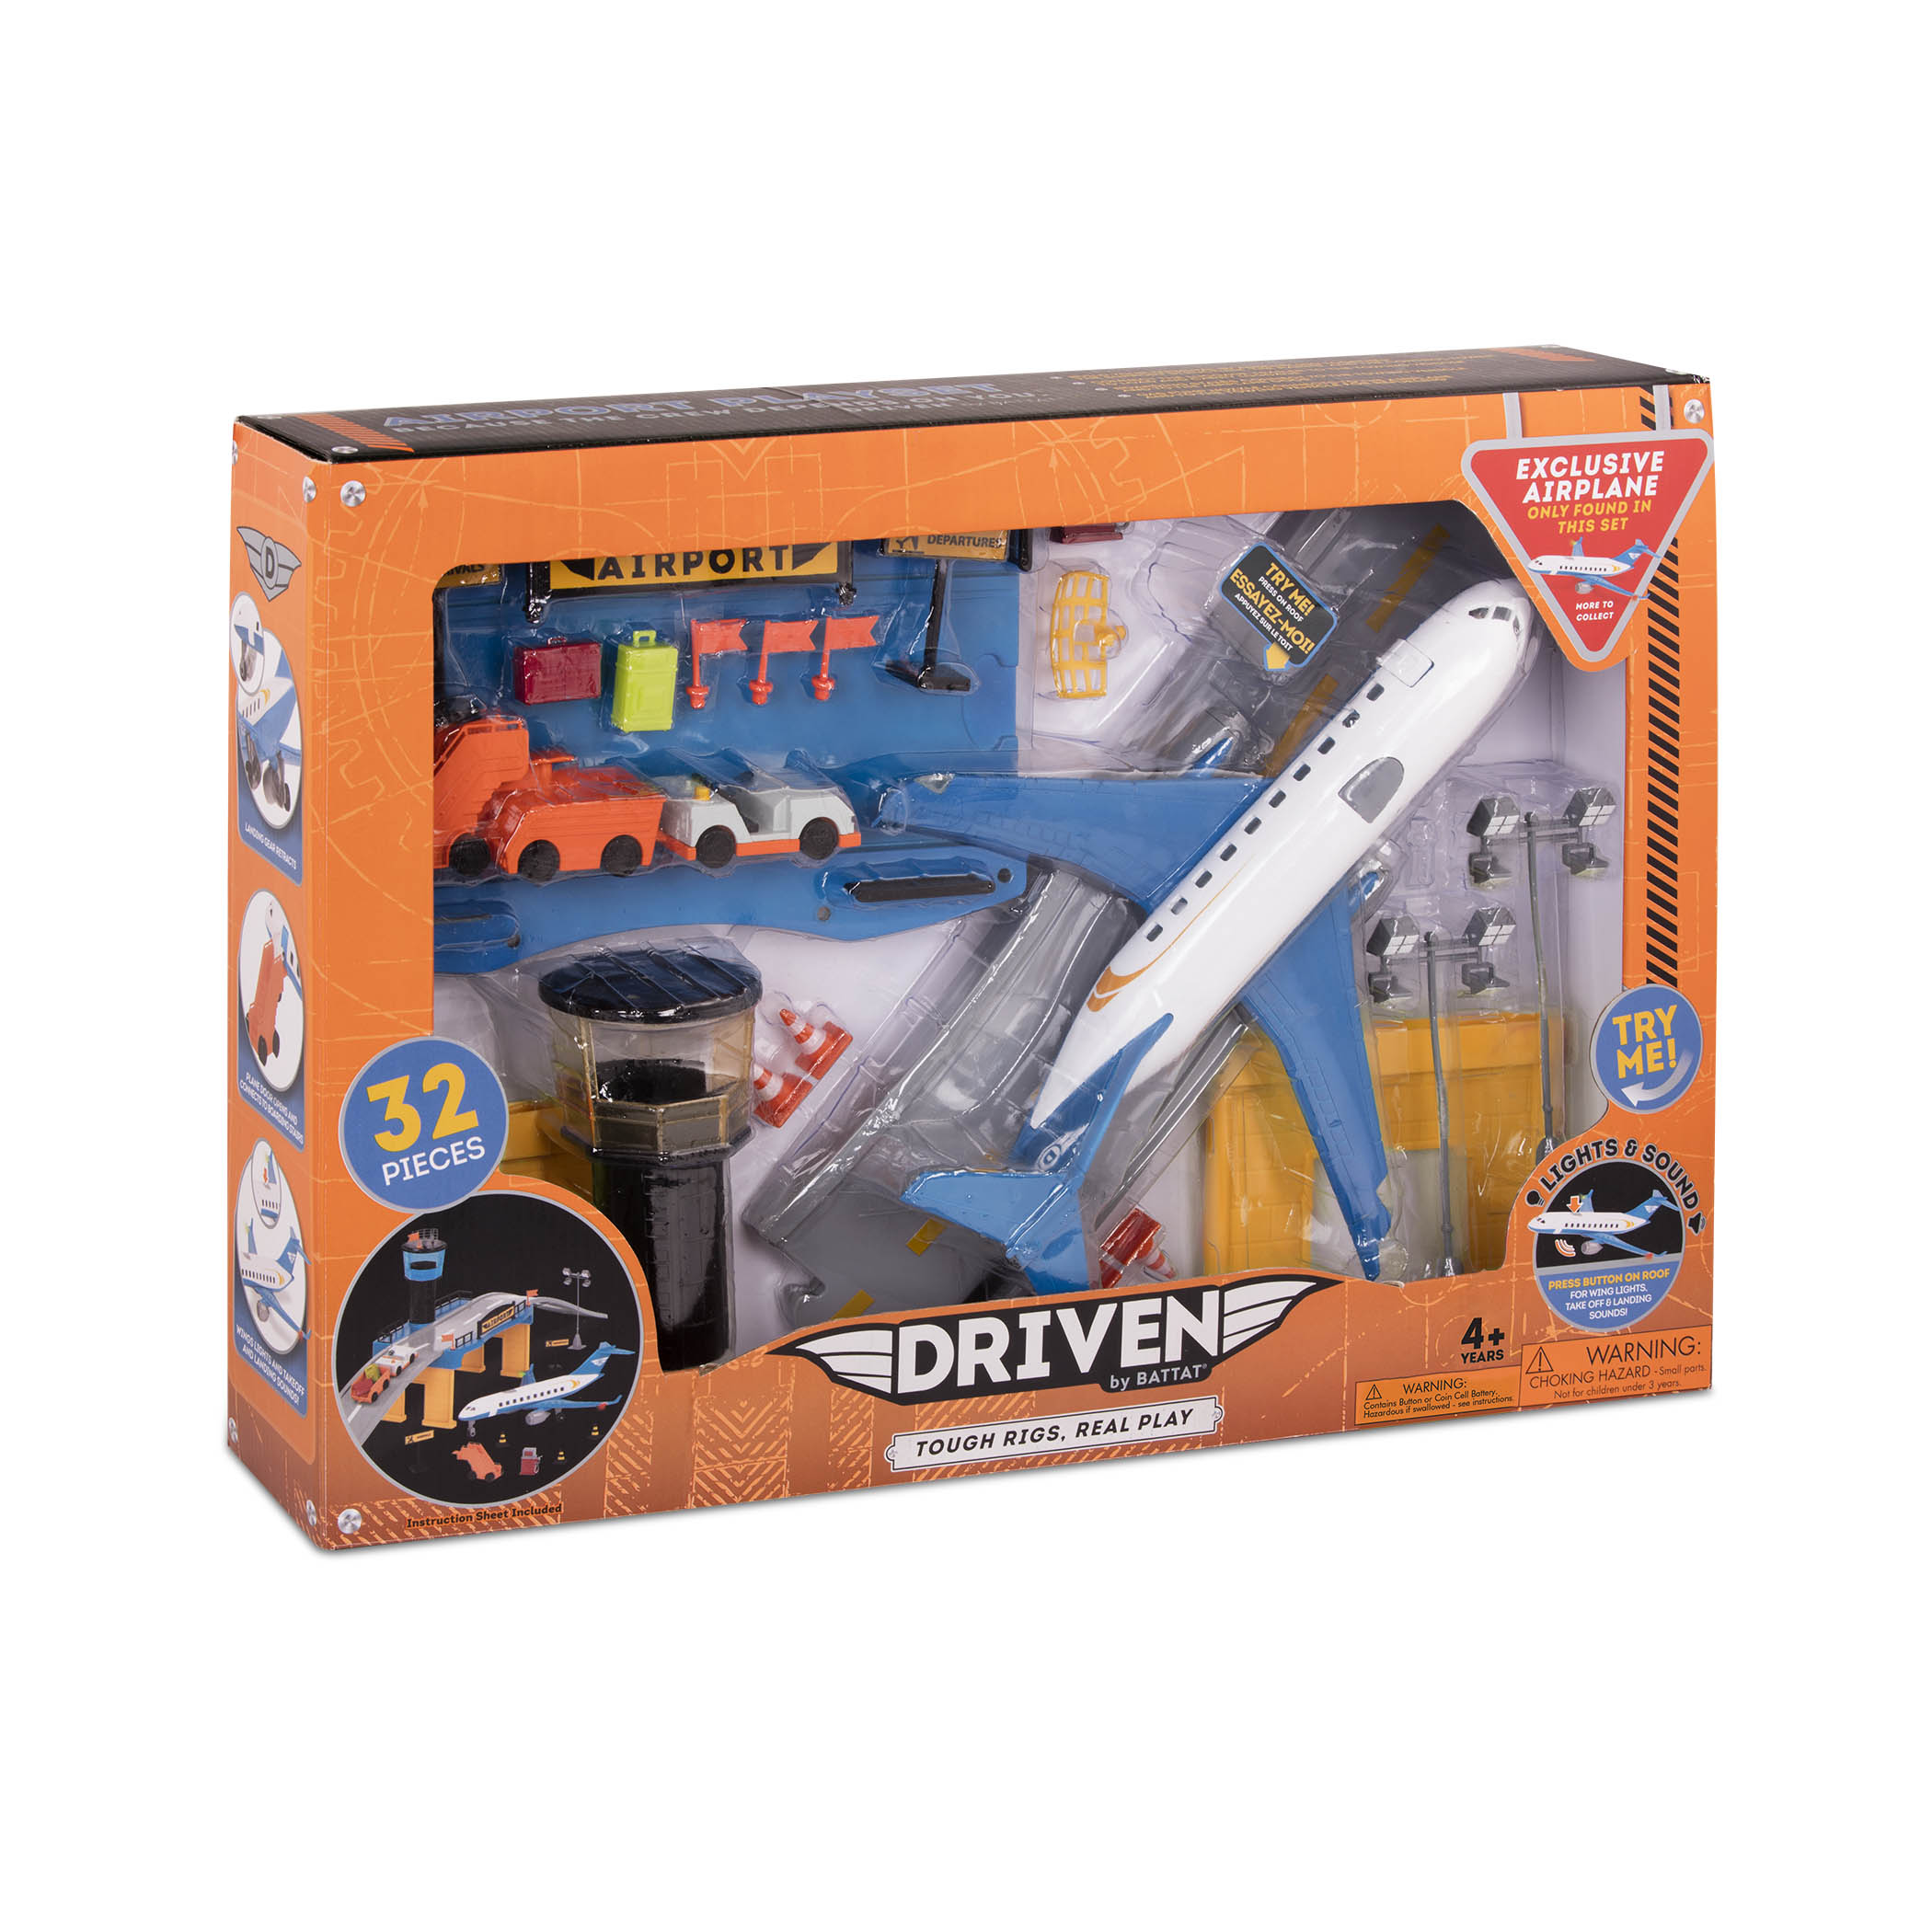 toy airport play set